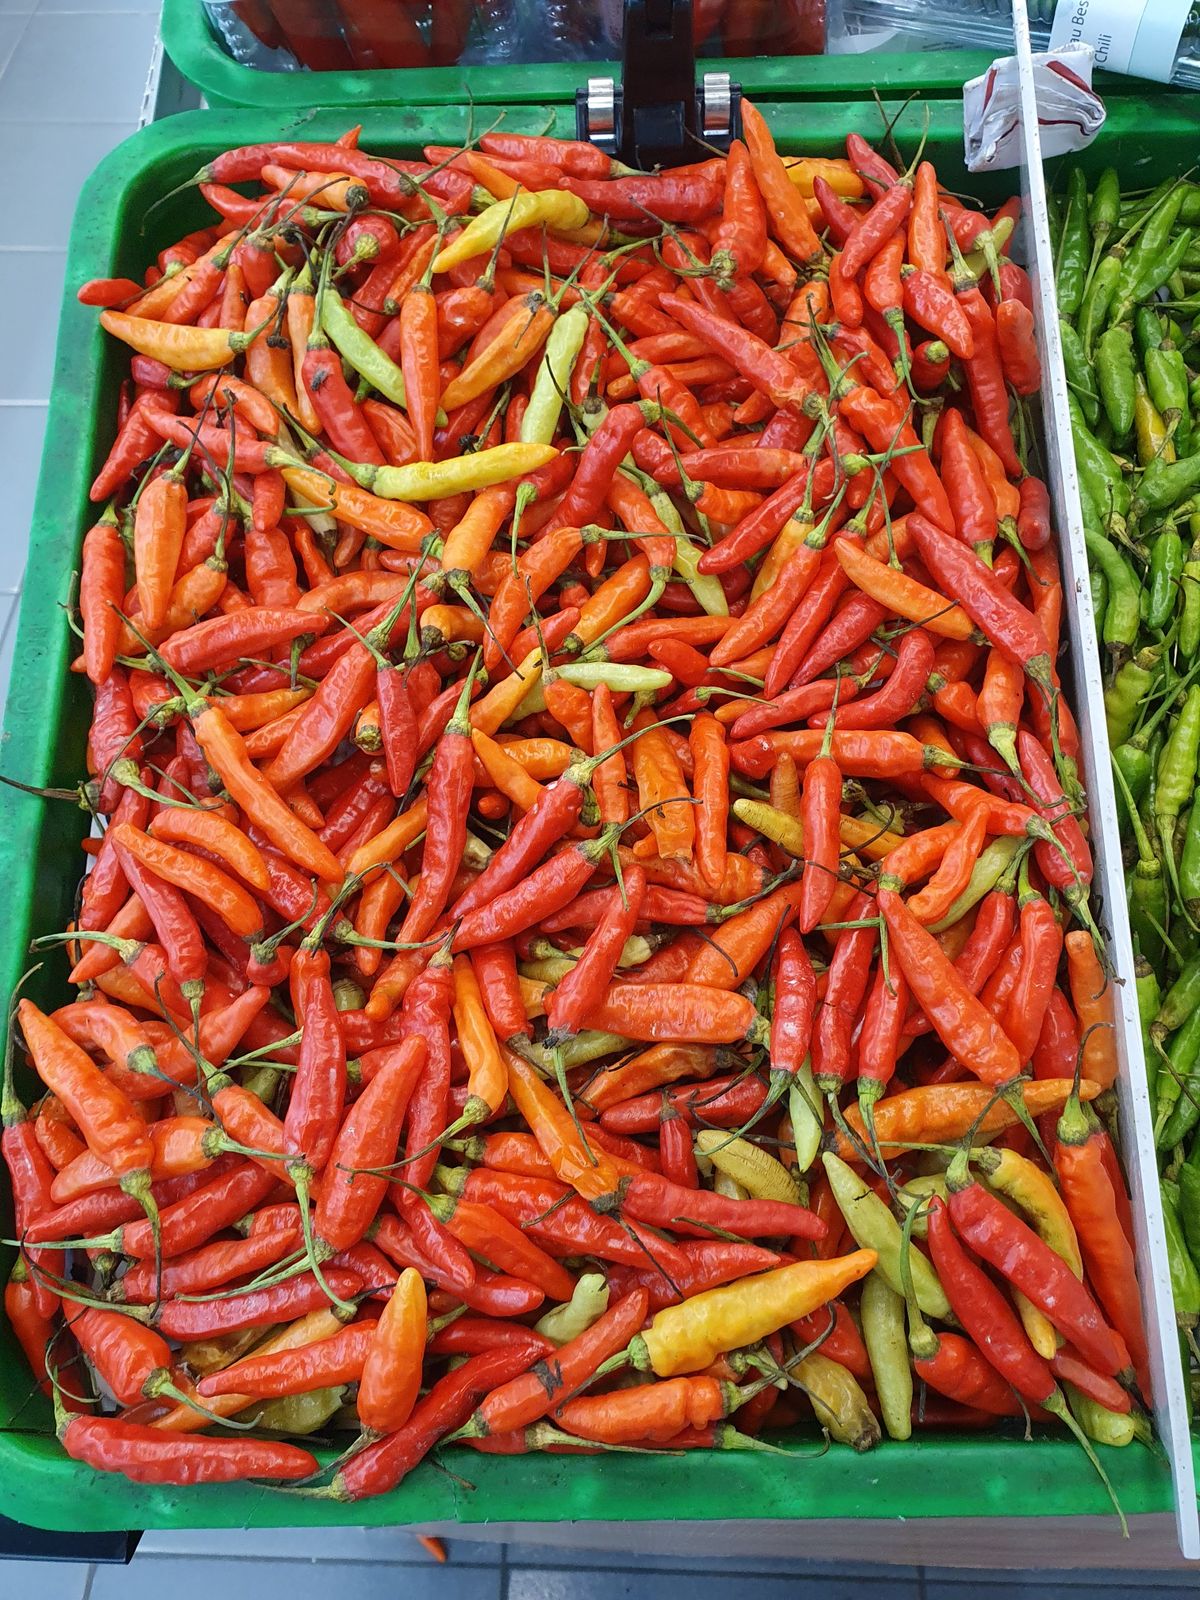 Red Peppers Chili Peppers